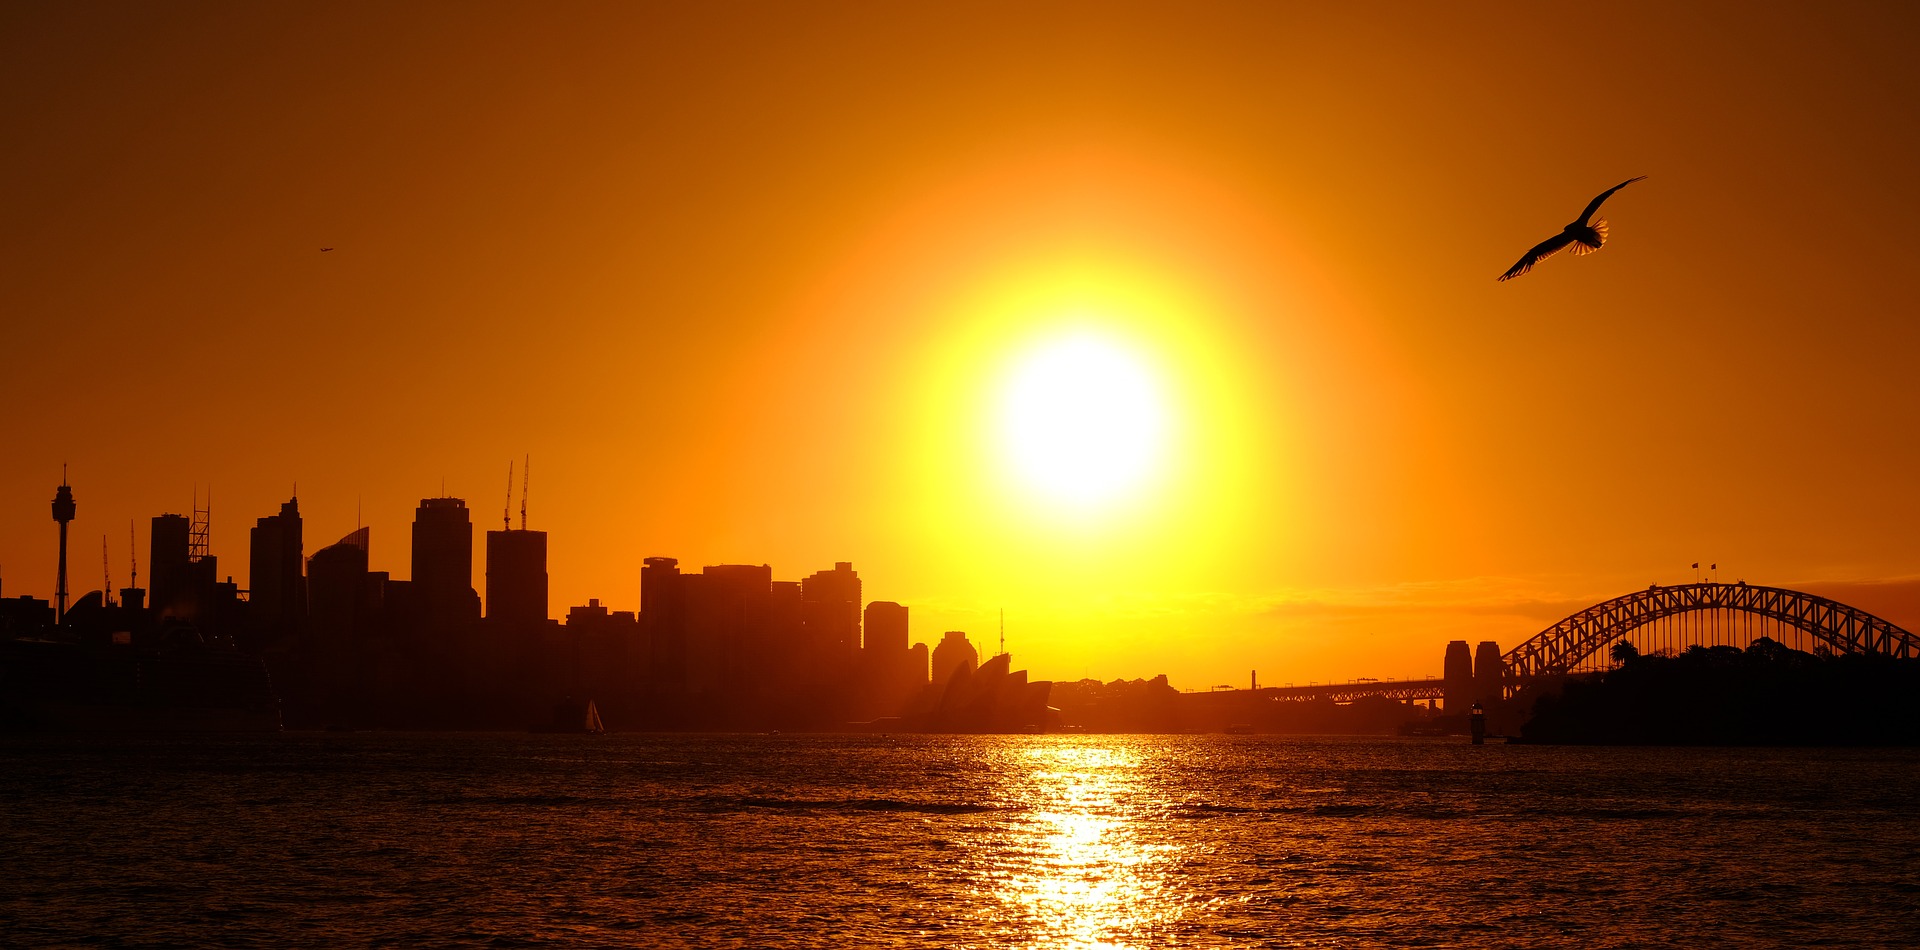 Sydney's hottest day in two years